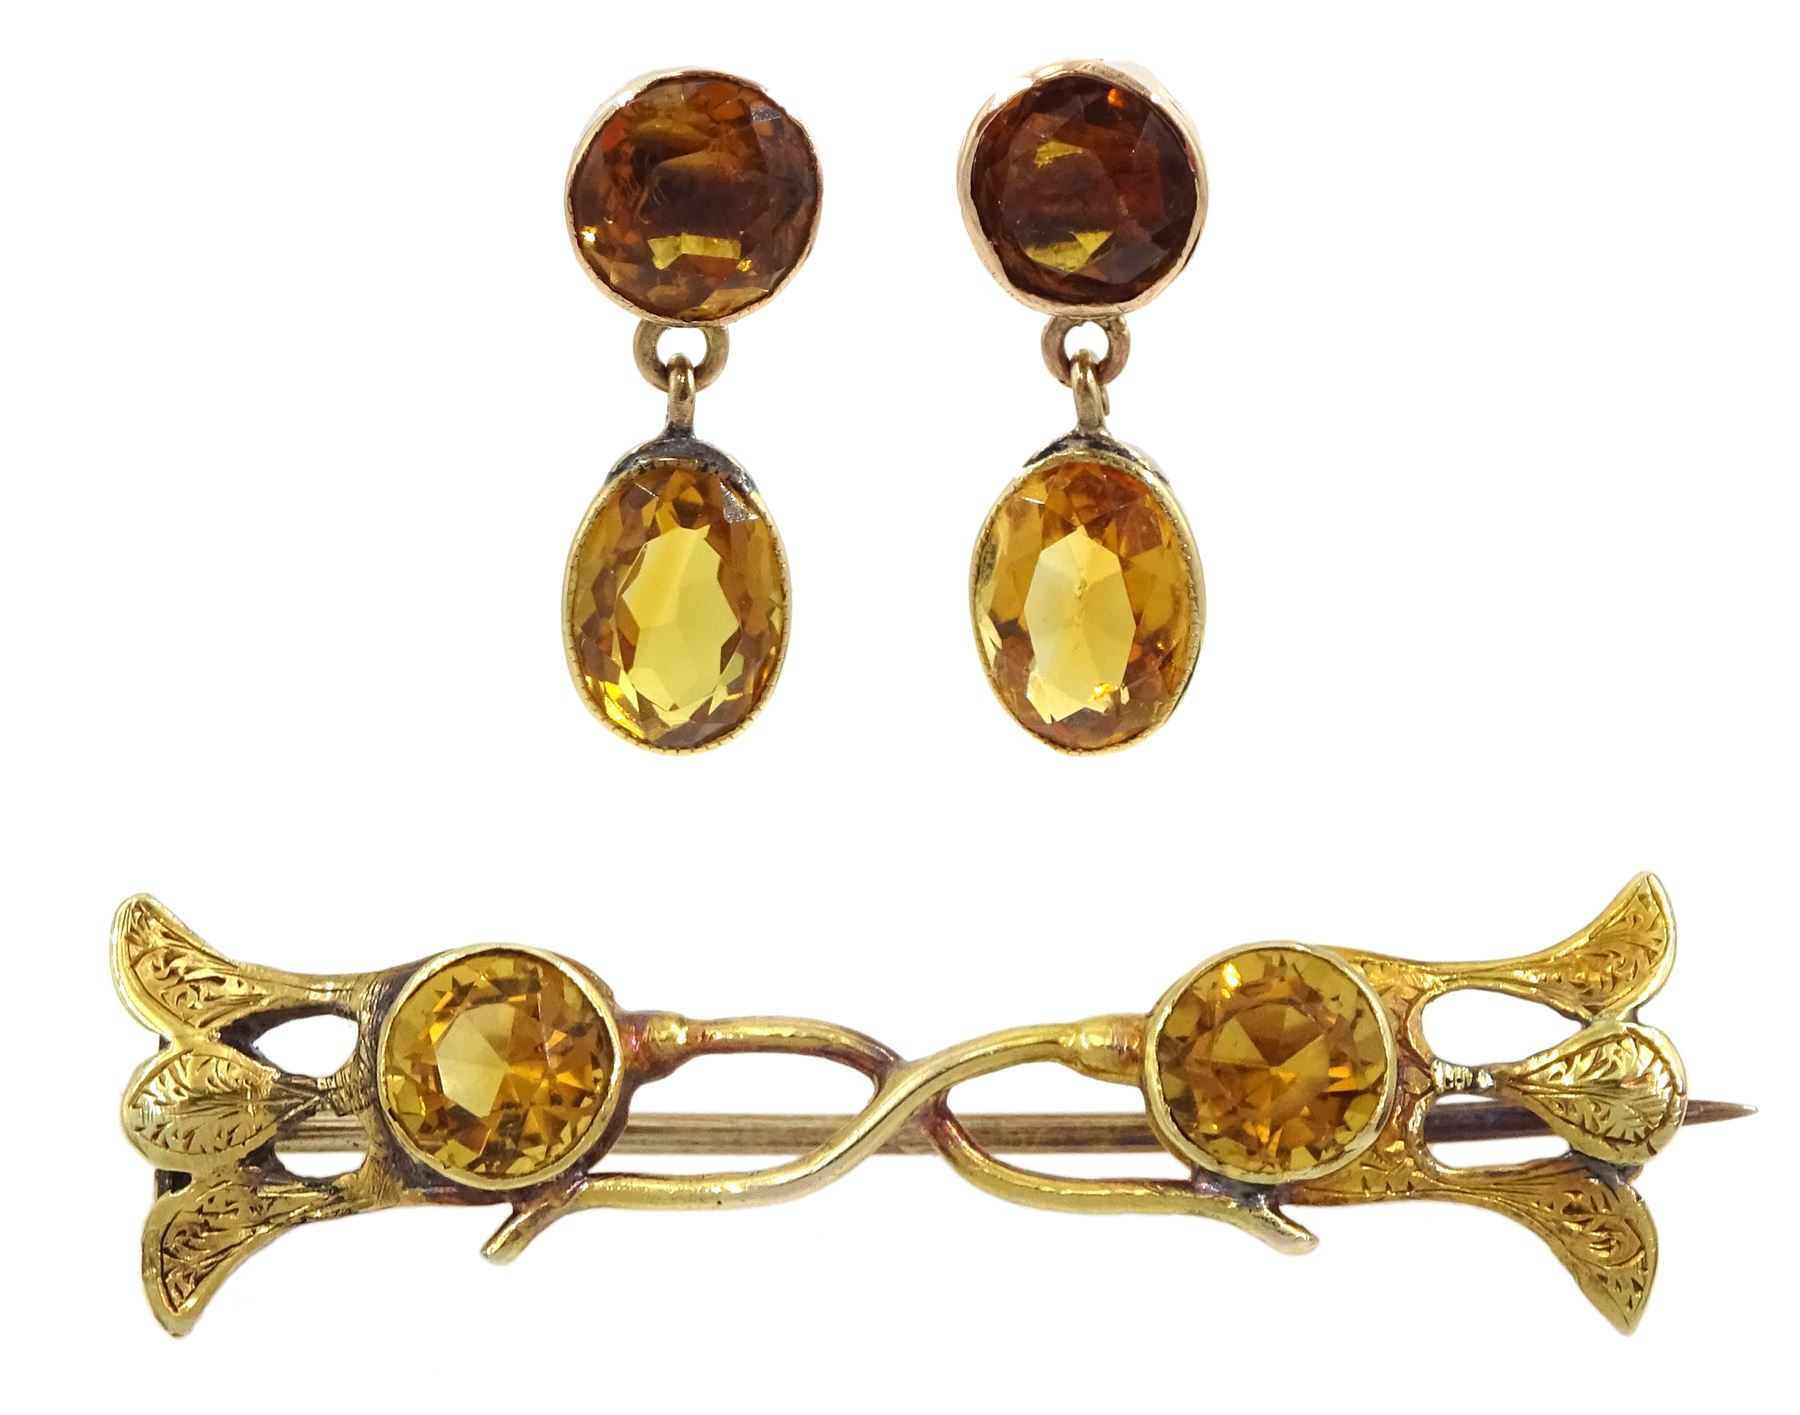 Early 20th century gold citrine brooch and pair of gold citrine pendant stud earrings